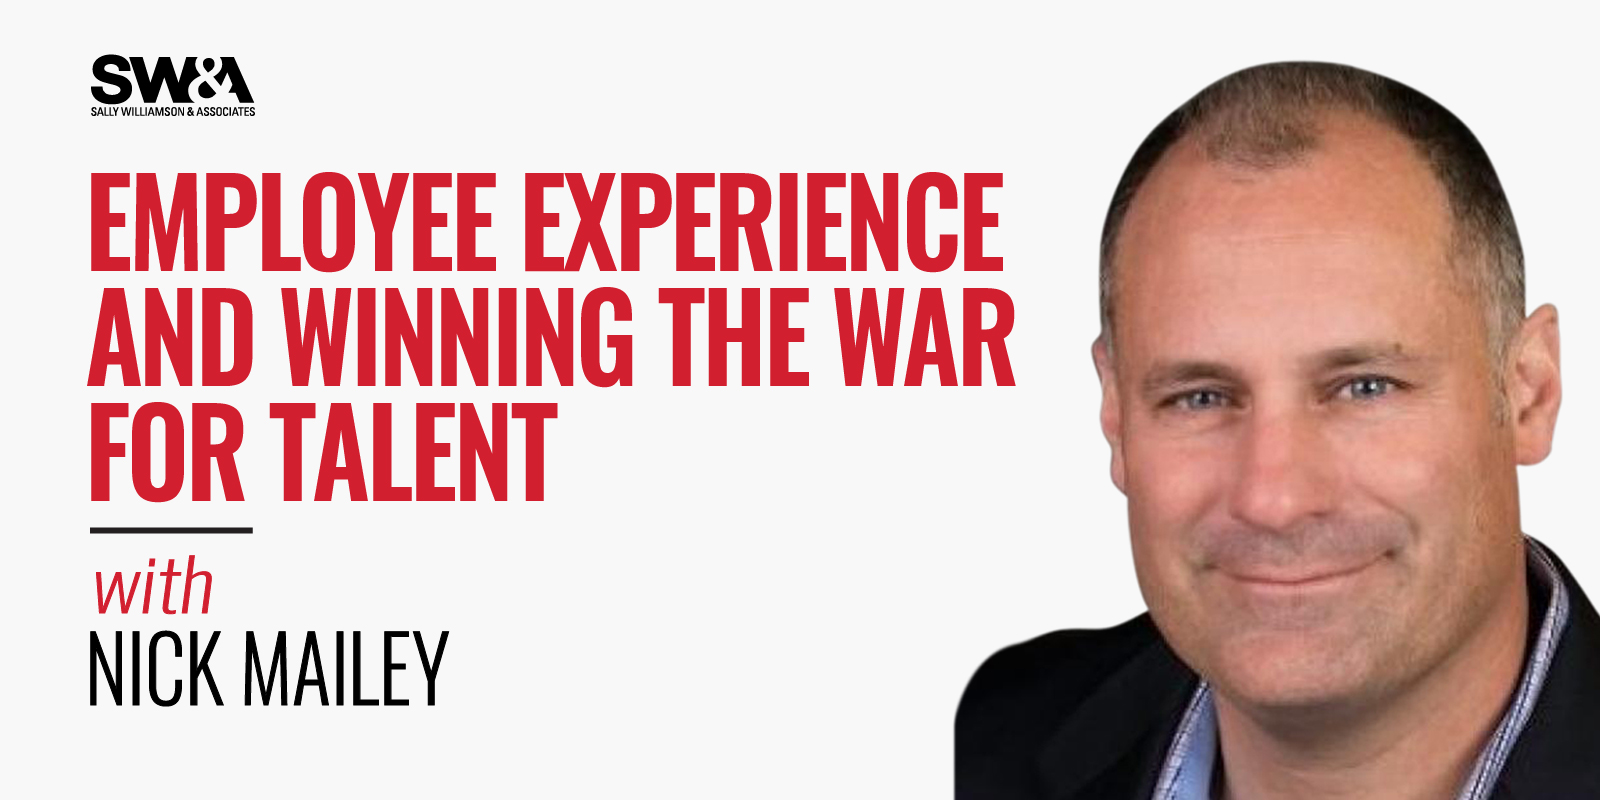 Employee Experience and Winning the War for Talent with Nick Mailey